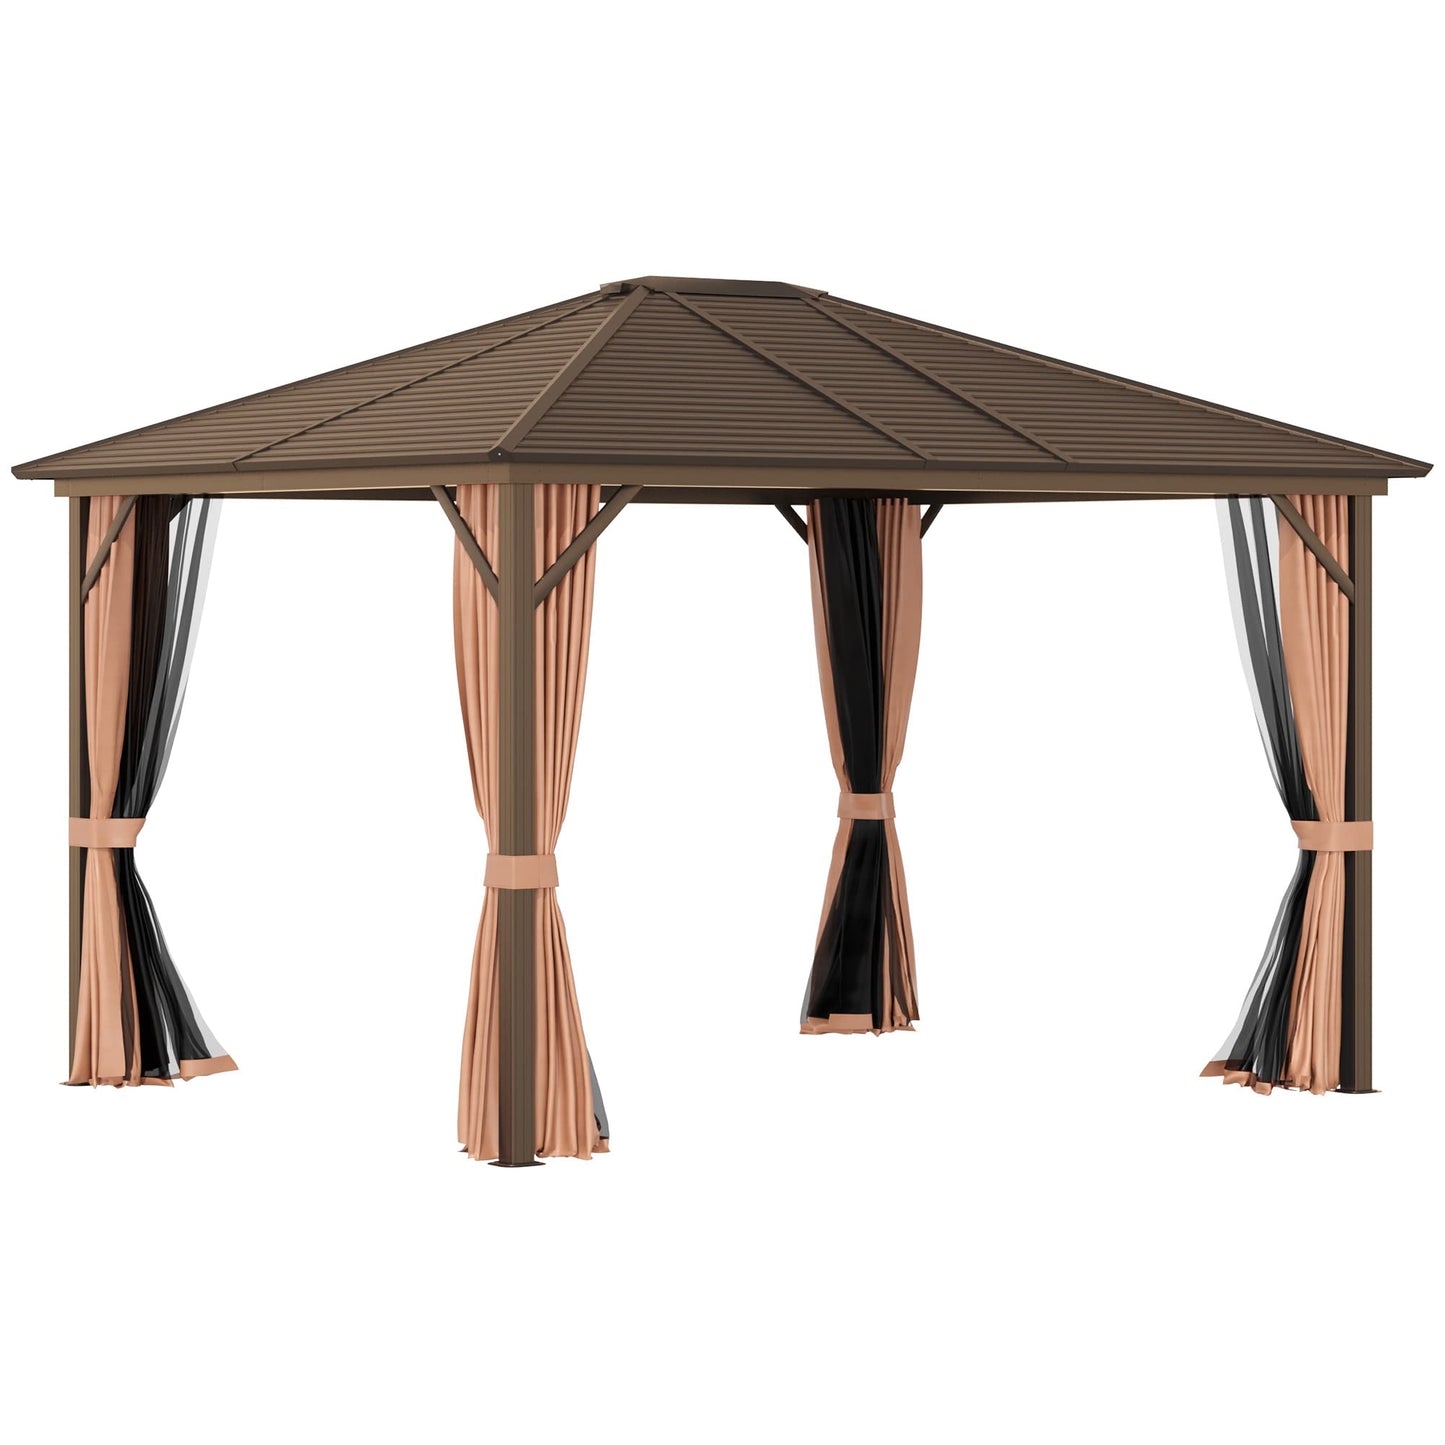 Outsunny 10x12ft Hardtop Gazebo, Steel Roof, Netting, Curtains, Brown